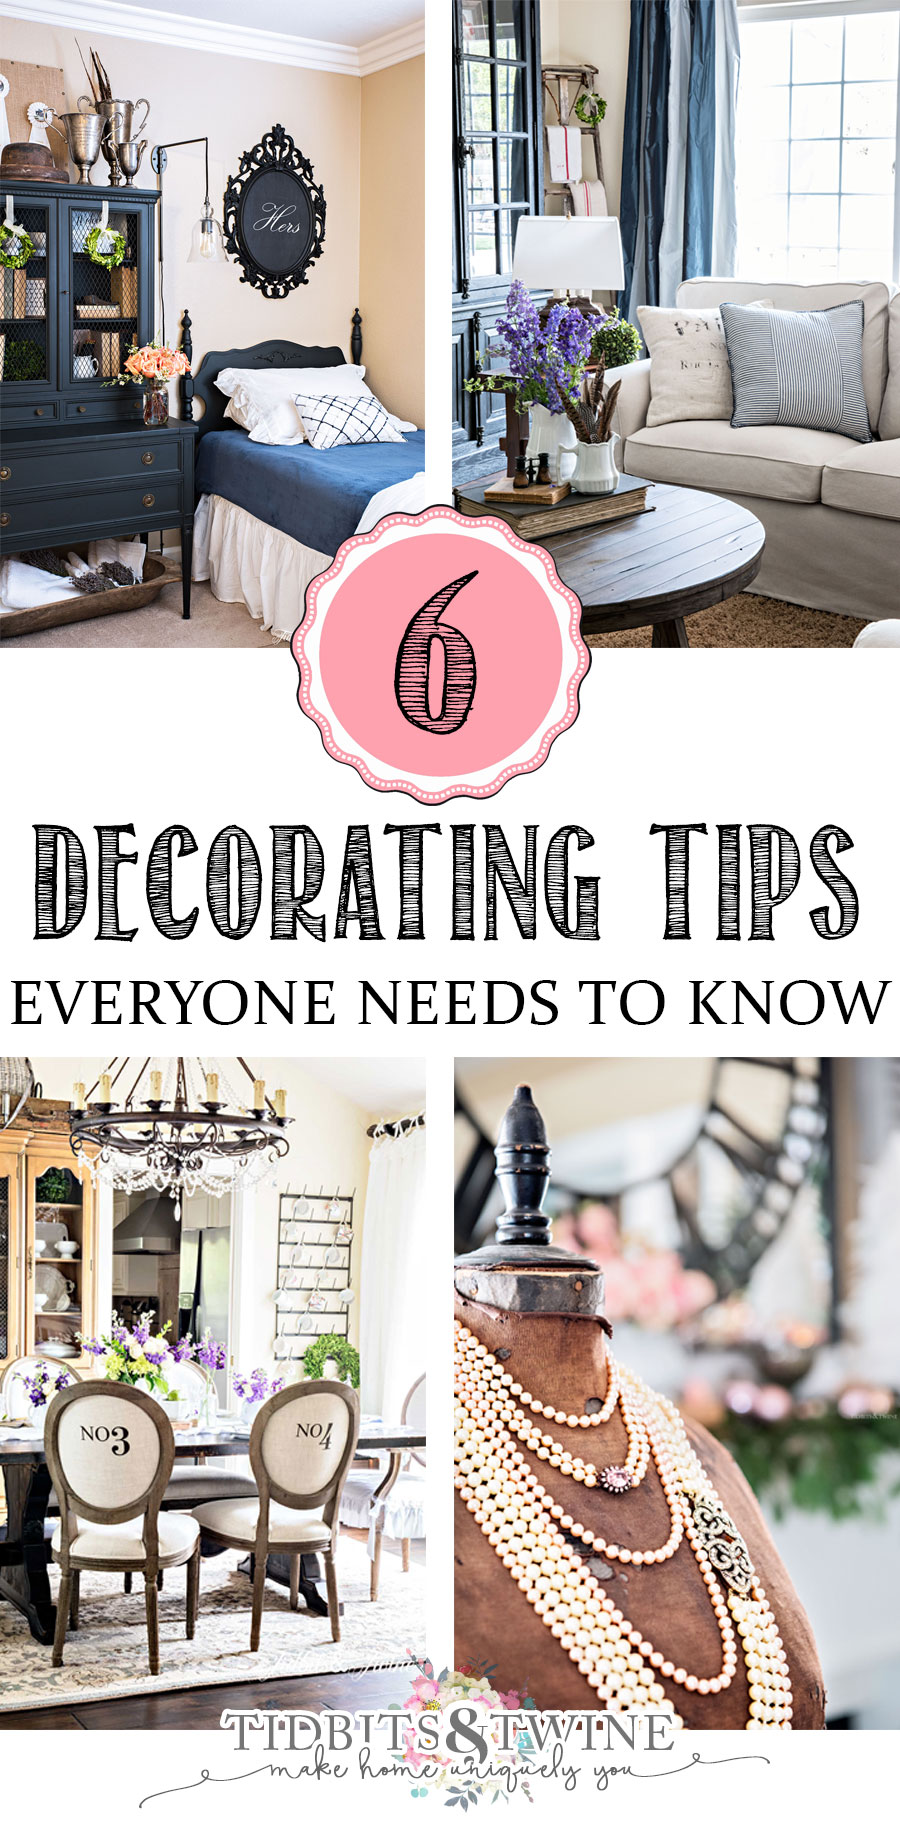 The 6 Decorating Tips Everyone Needs to Know